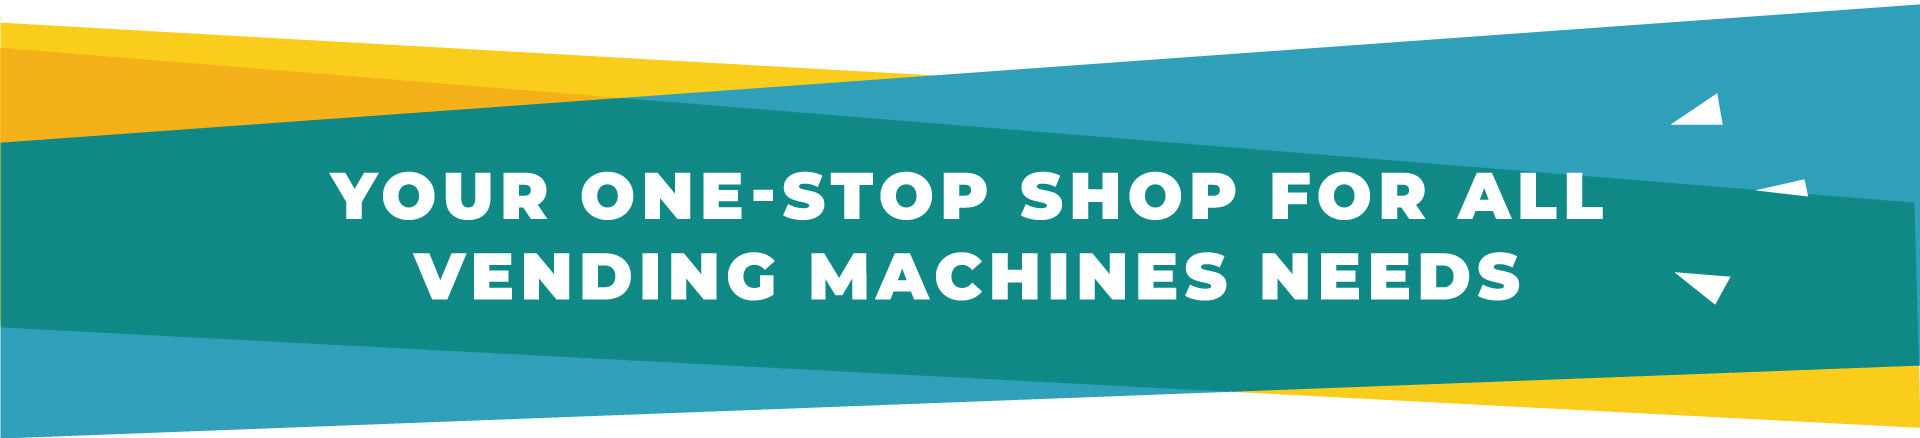 Your One-Stop Shop For All Vending Machines Needs